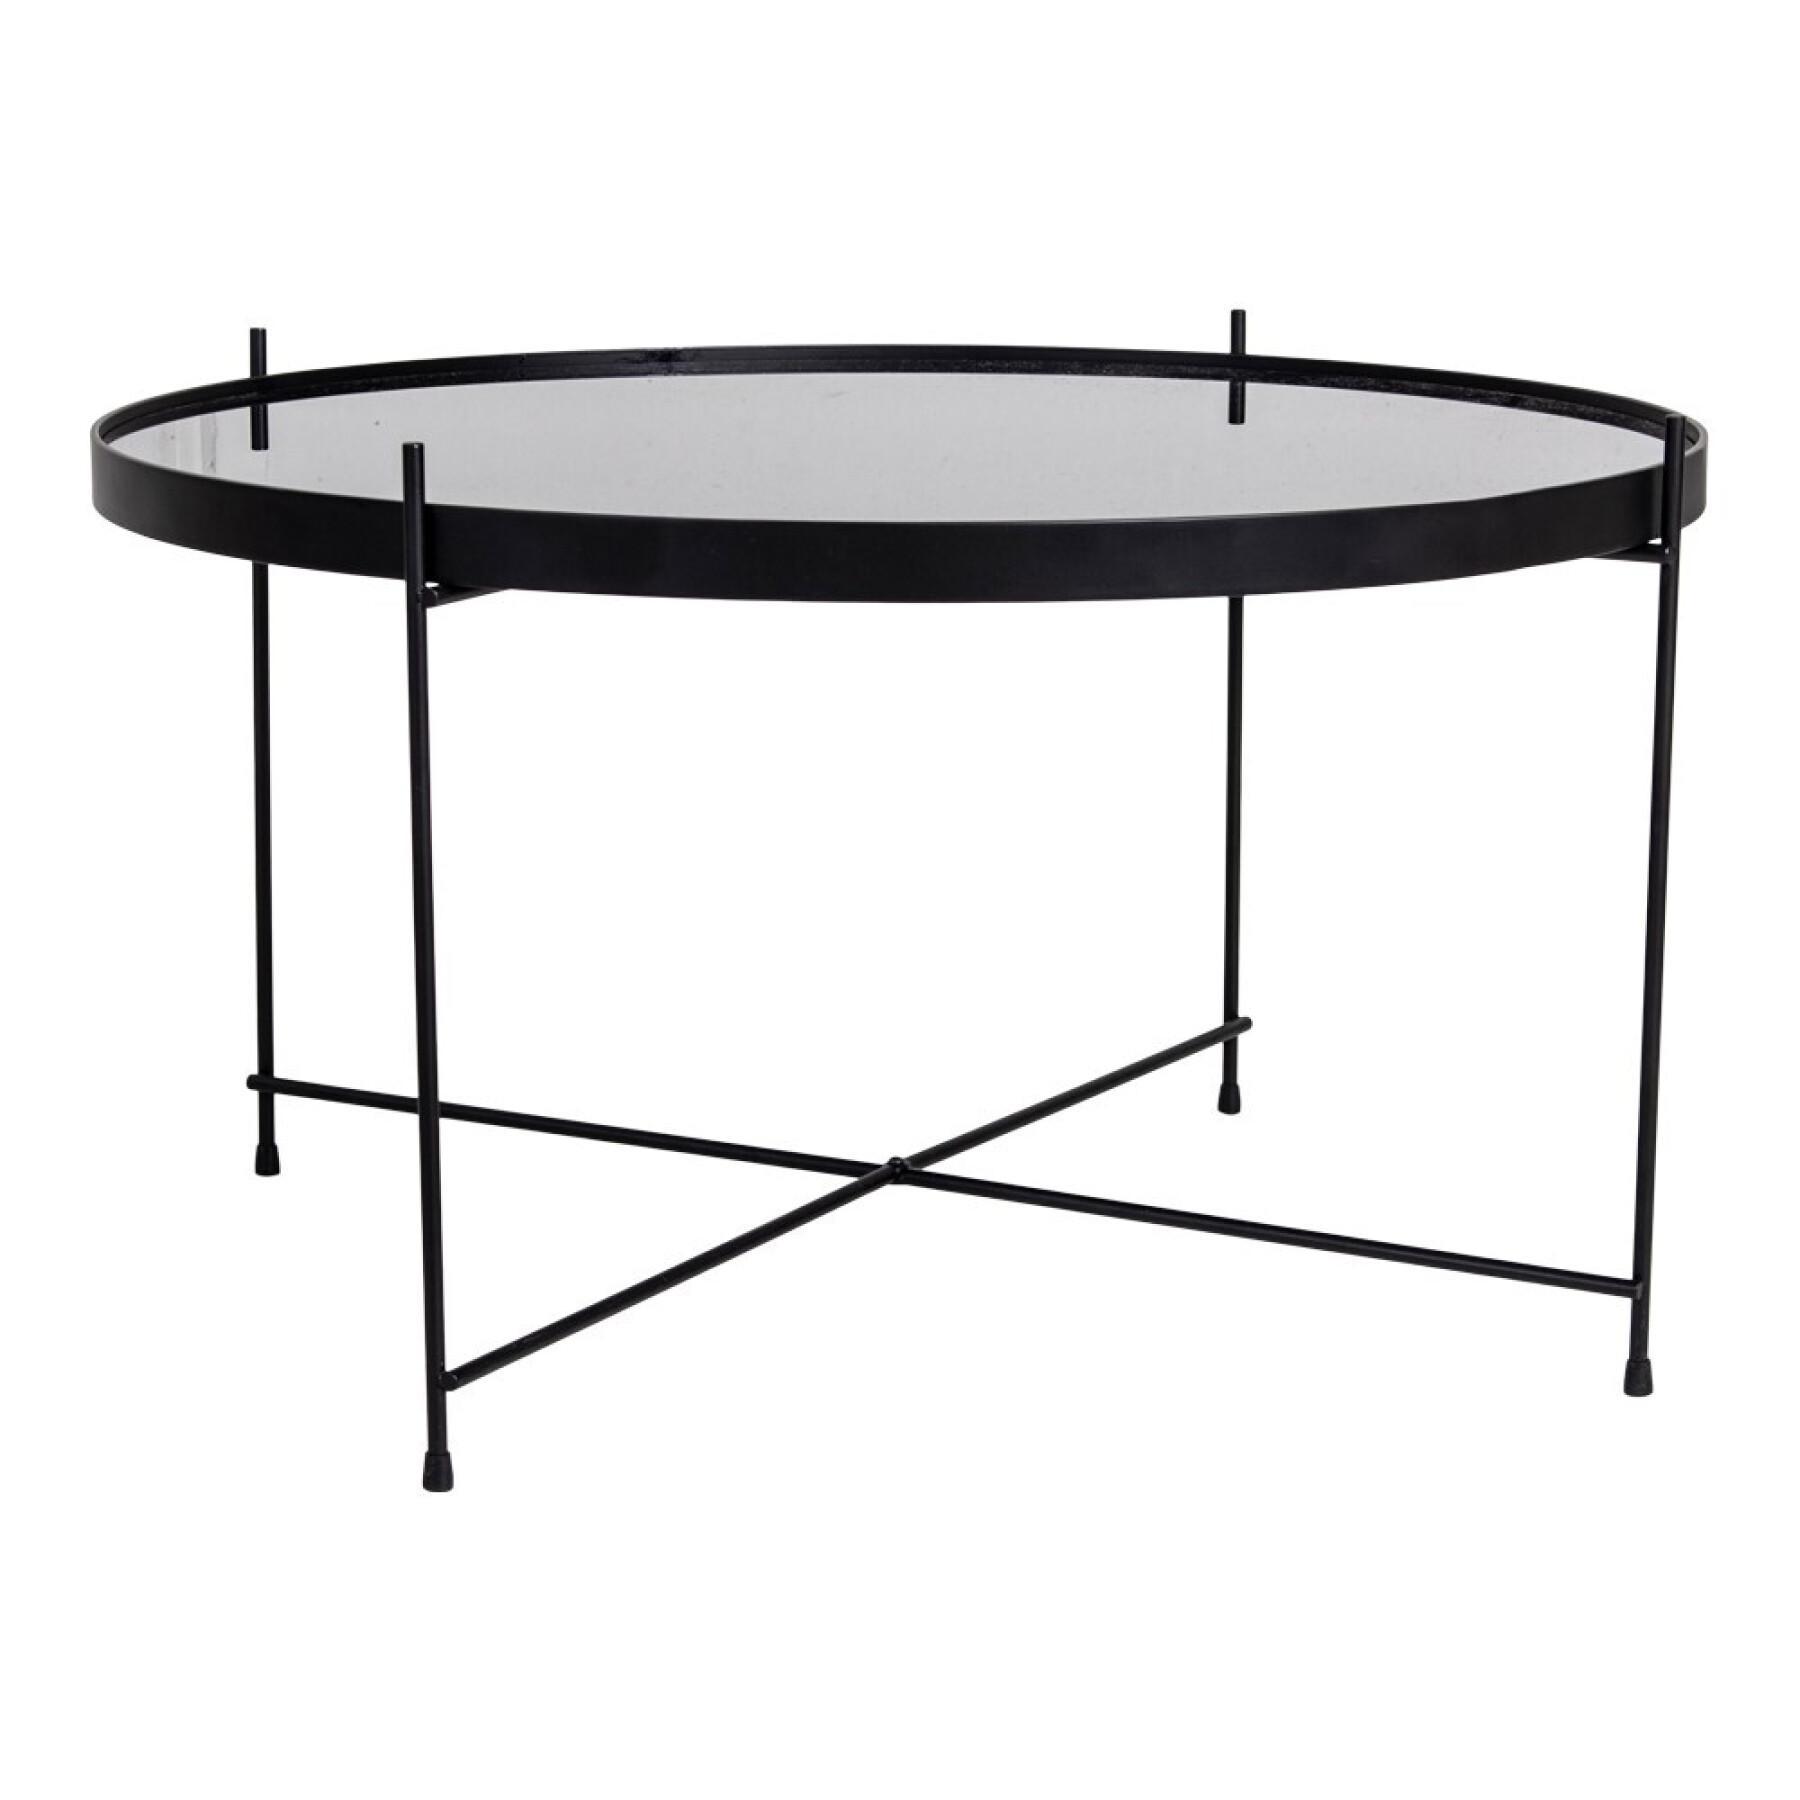 Coffee table in black powder-coated steel with glass House Nordic Venezia